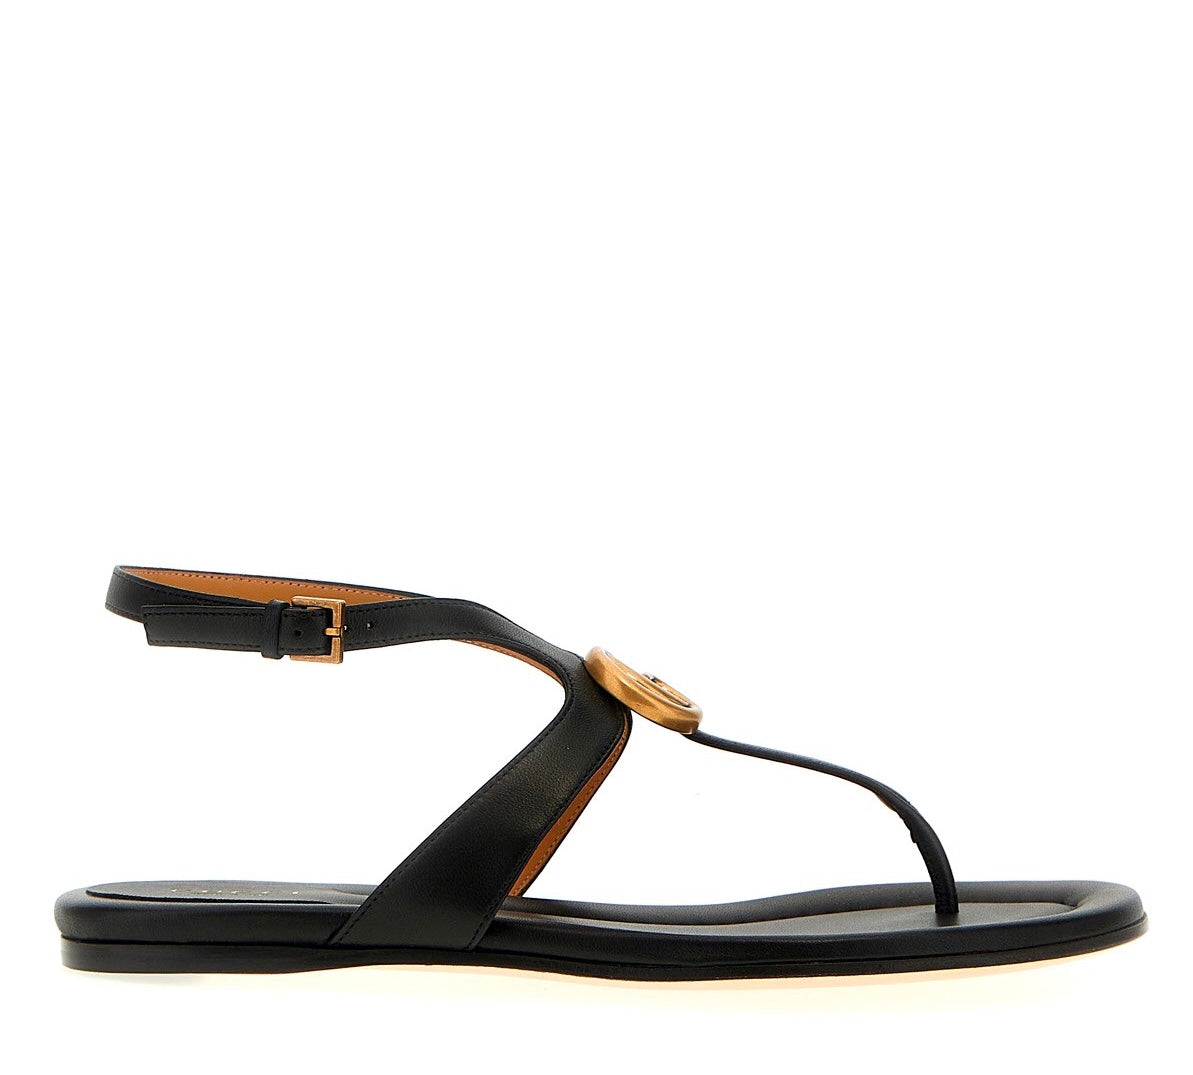 GUCCI WOMEN’S GG THONG LEATHER SANDALS